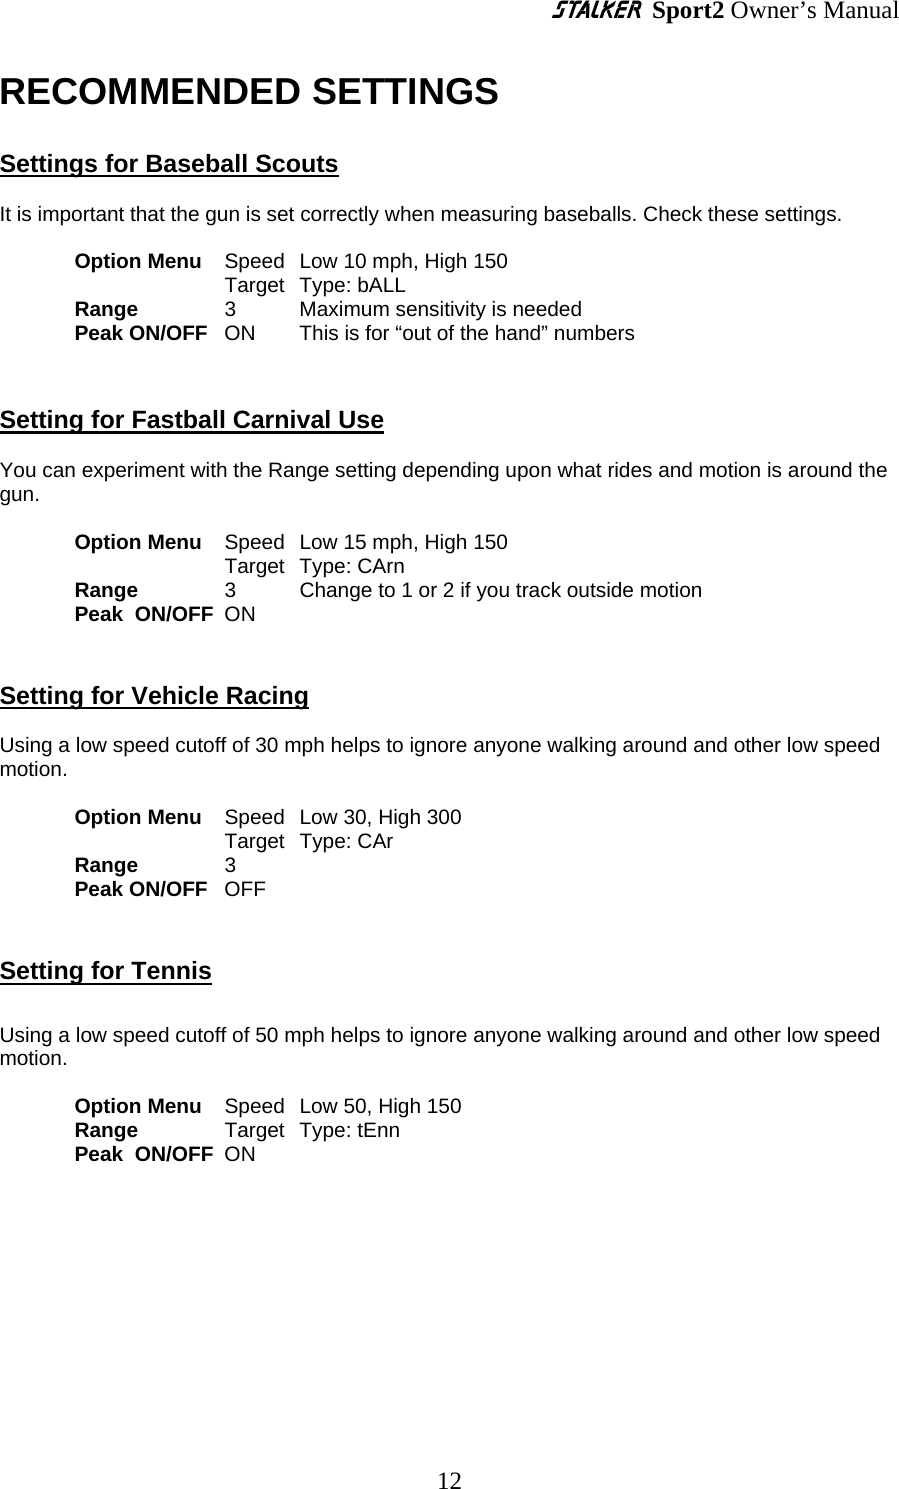 S Sport2 Owner’s Manual RECOMMENDED SETTINGS  Settings for Baseball Scouts  It is important that the gun is set correctly when measuring baseballs. Check these settings.   Option Menu   Speed  Low 10 mph, High 150 Target  Type: bALL   Range    3   Maximum sensitivity is needed Peak ON/OFF   ON    This is for “out of the hand” numbers   Setting for Fastball Carnival Use  You can experiment with the Range setting depending upon what rides and motion is around the gun.   Option Menu   Speed  Low 15 mph, High 150 Target  Type: CArn  Range   3   Change to 1 or 2 if you track outside motion Peak  ON/OFF ON  Setting for Vehicle Racing  Using a low speed cutoff of 30 mph helps to ignore anyone walking around and other low speed motion.   Option Menu   Speed  Low 30, High 300   Target Type: CAr Range    3 Peak ON/OFF   OFF      Setting for Tennis  Using a low speed cutoff of 50 mph helps to ignore anyone walking around and other low speed motion.   Option Menu   Speed  Low 50, High 150 Range   Target Type: tEnn Peak  ON/OFF ON       12 